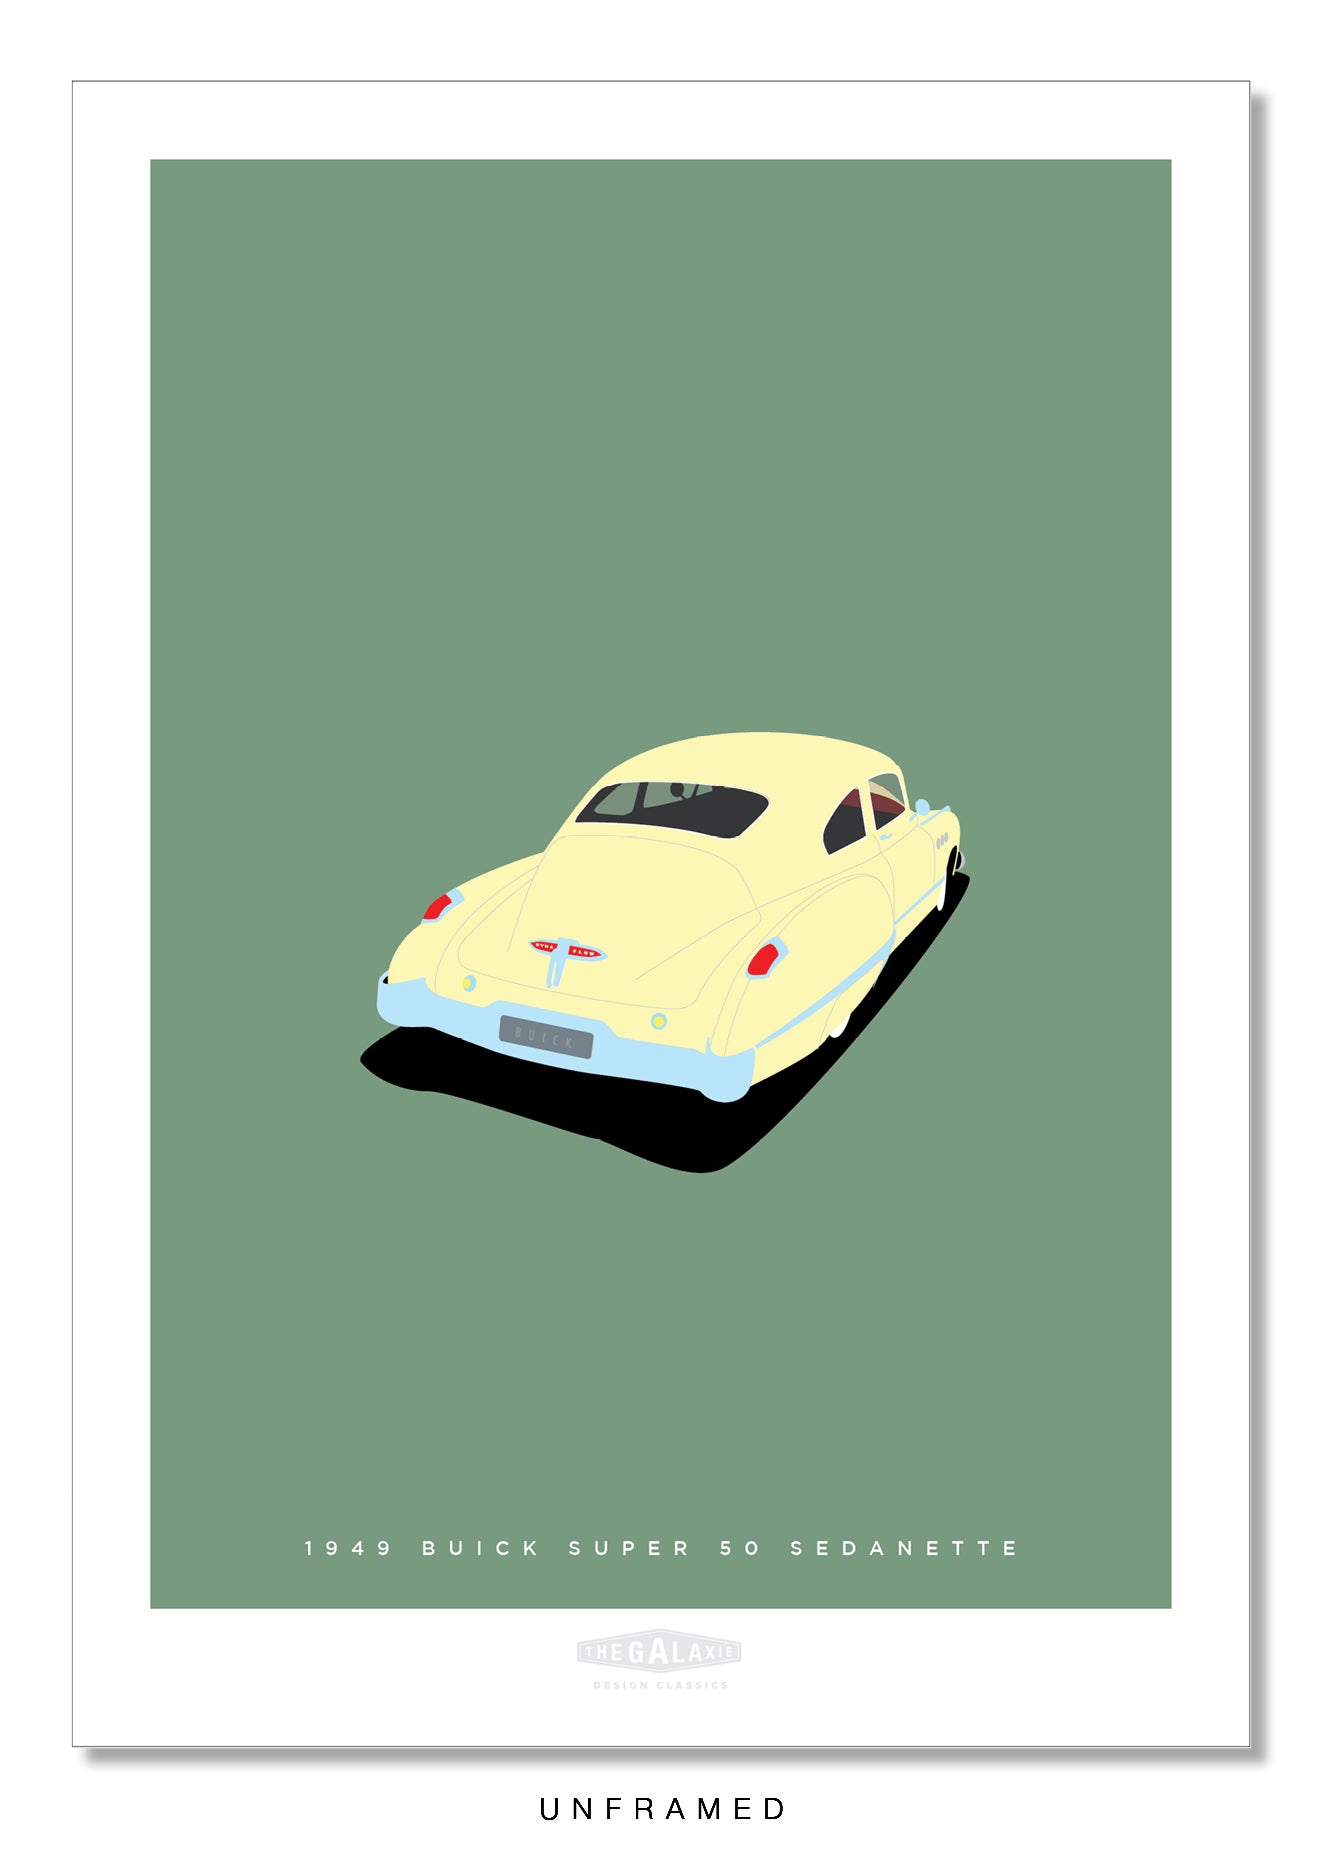 Classy hand drawn poster of a totally stunning cream 1949 Buick Super 50 Sedanette on a soft green background.